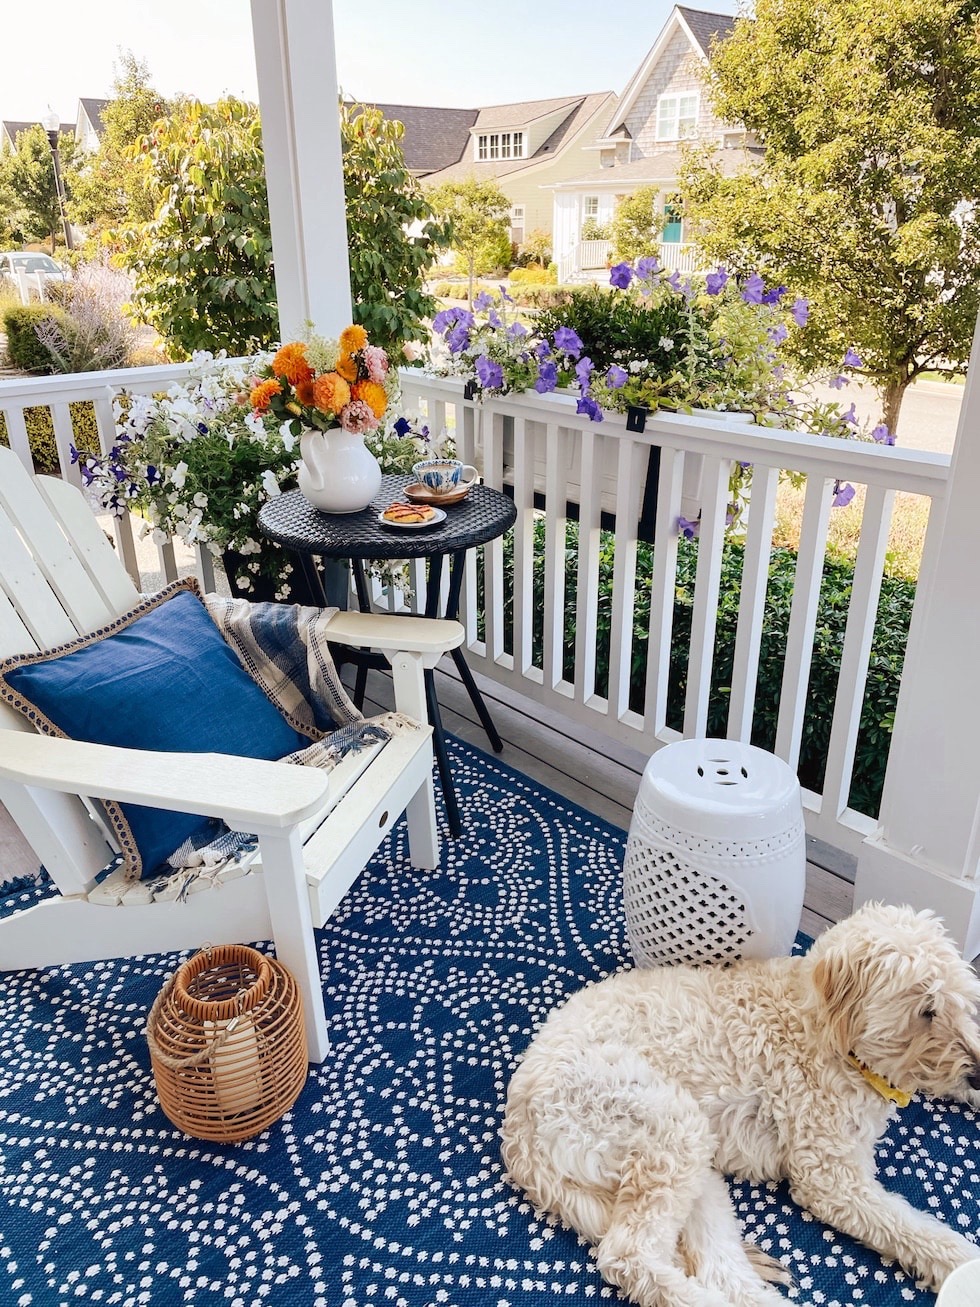 Outdoor Cushion and Rug Care + Patio FAQ - The Inspired Room